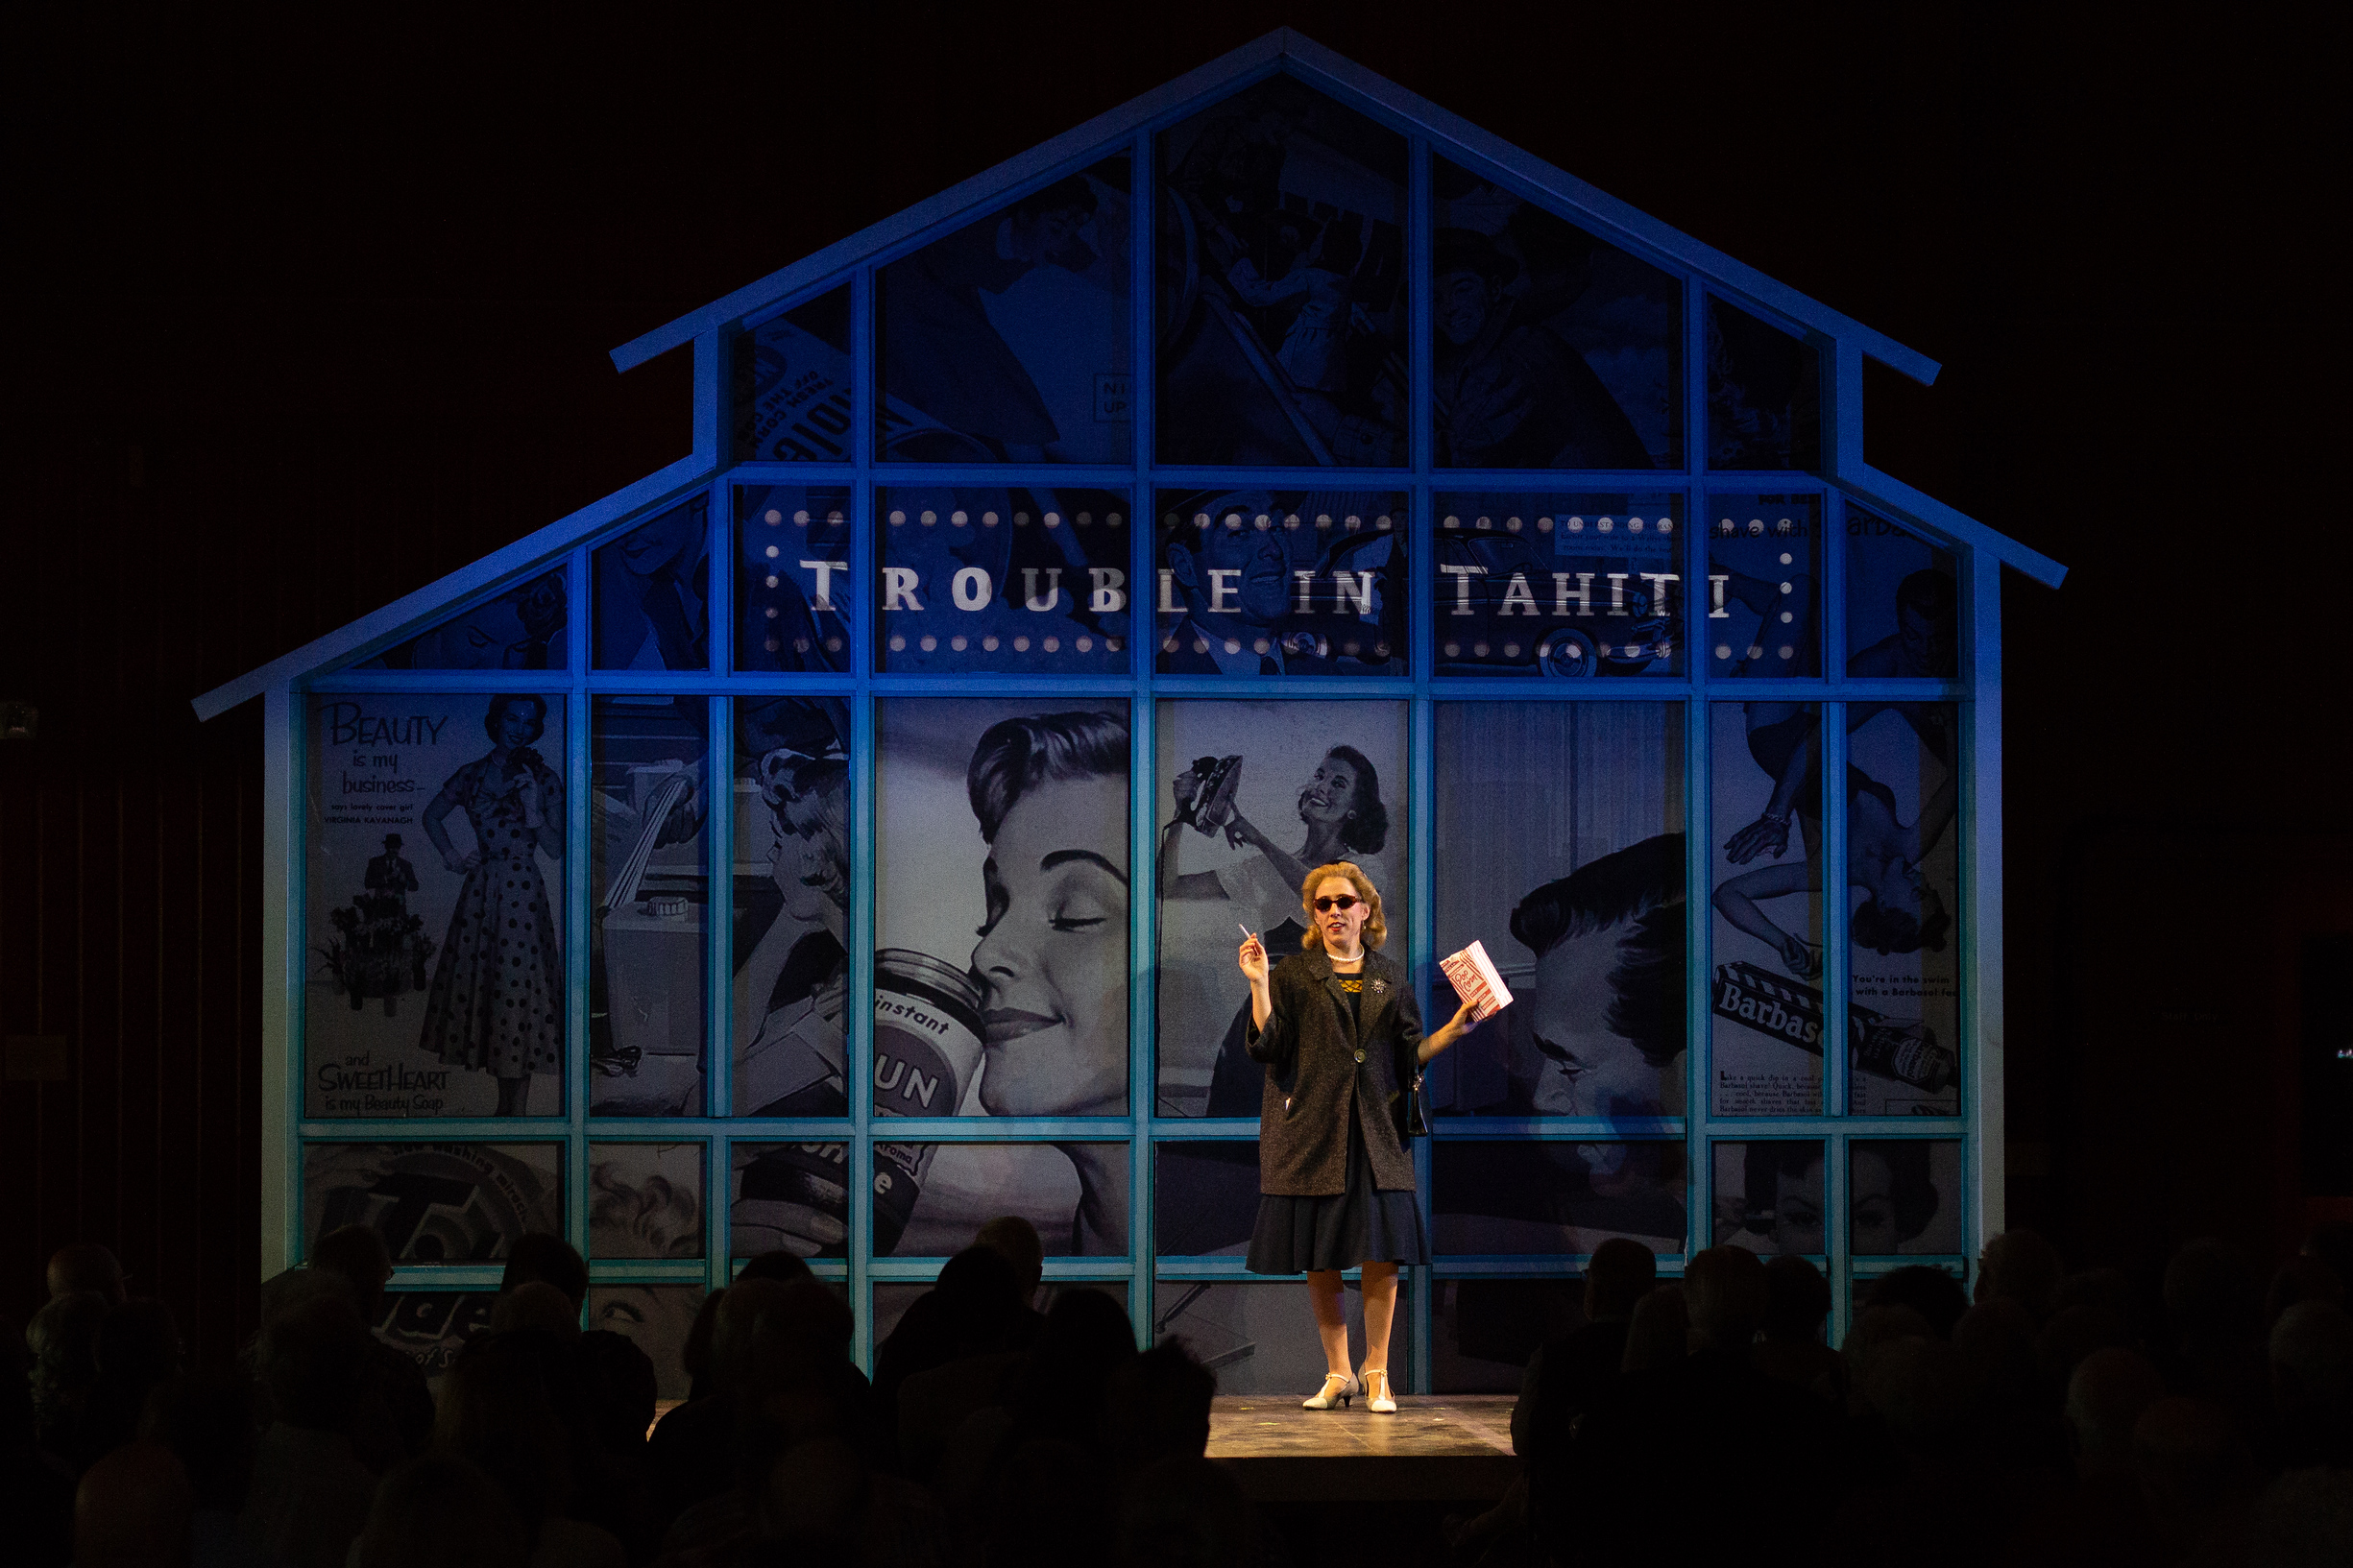  Dinah in  Trouble in Tahiti  at The Glimmerglass Festival 2018  Photo: Connor Lange 